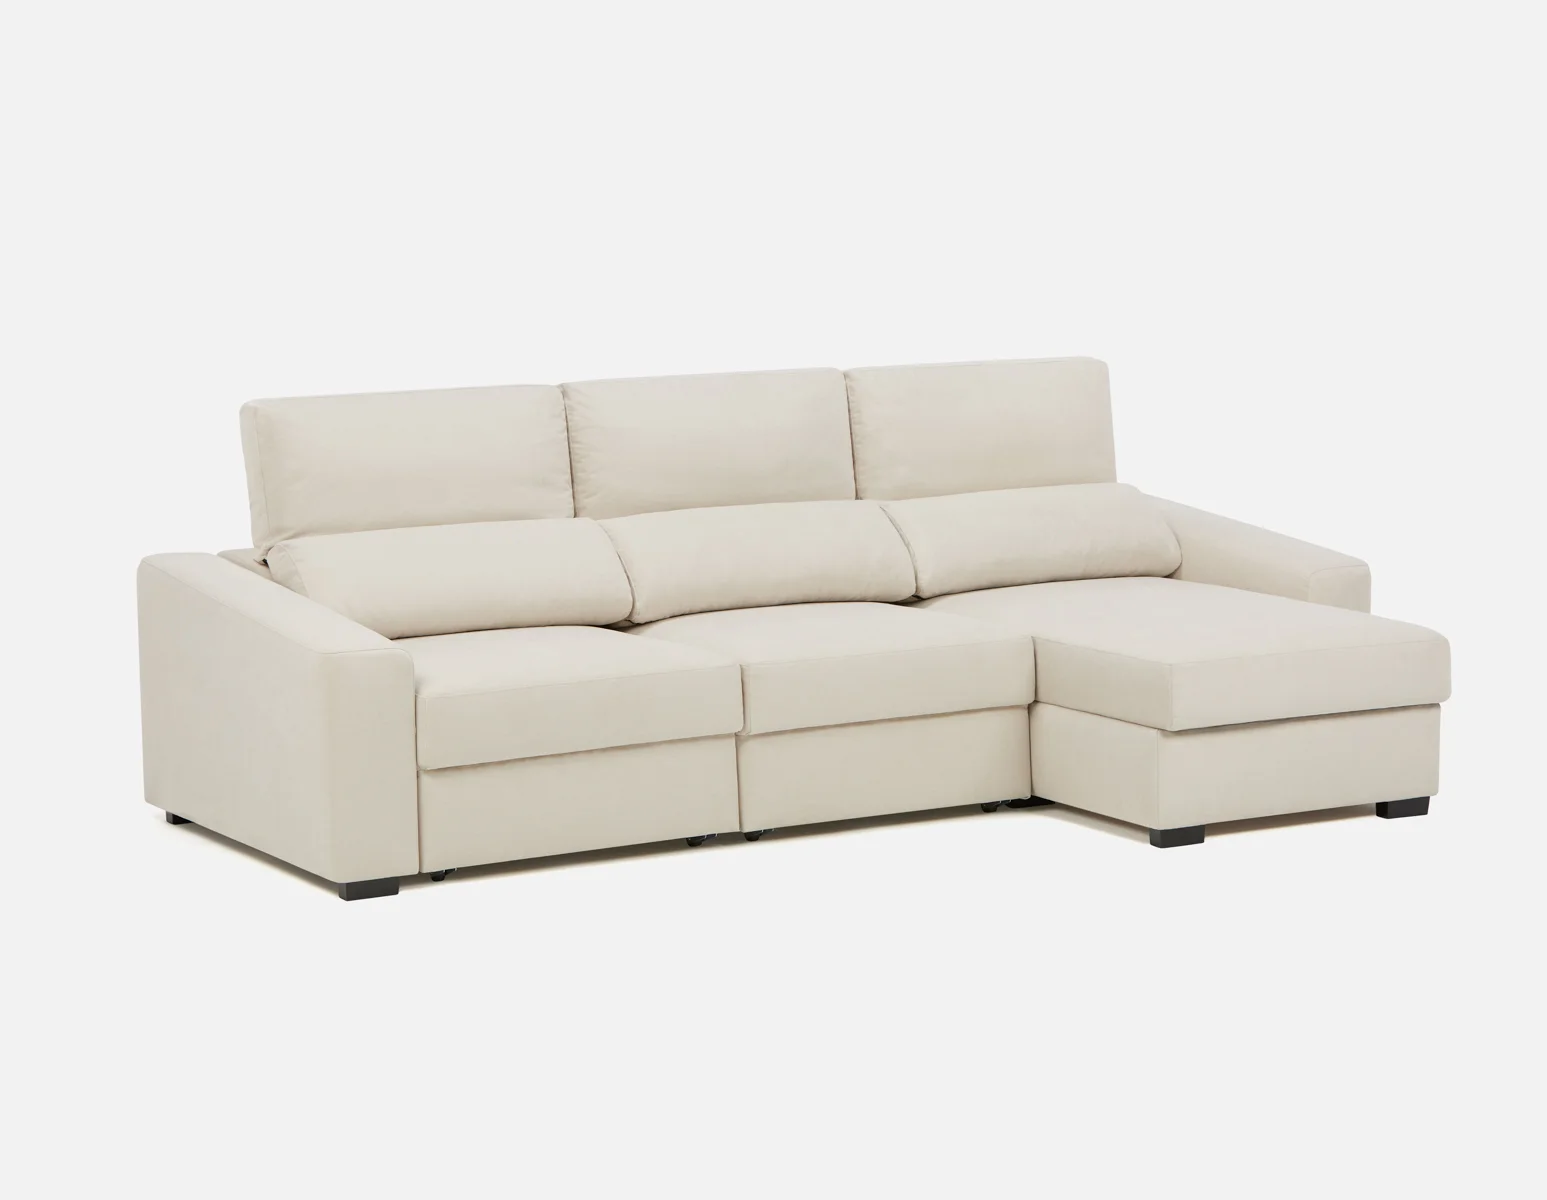 SINTRA interchangeable sectional sofa-bed